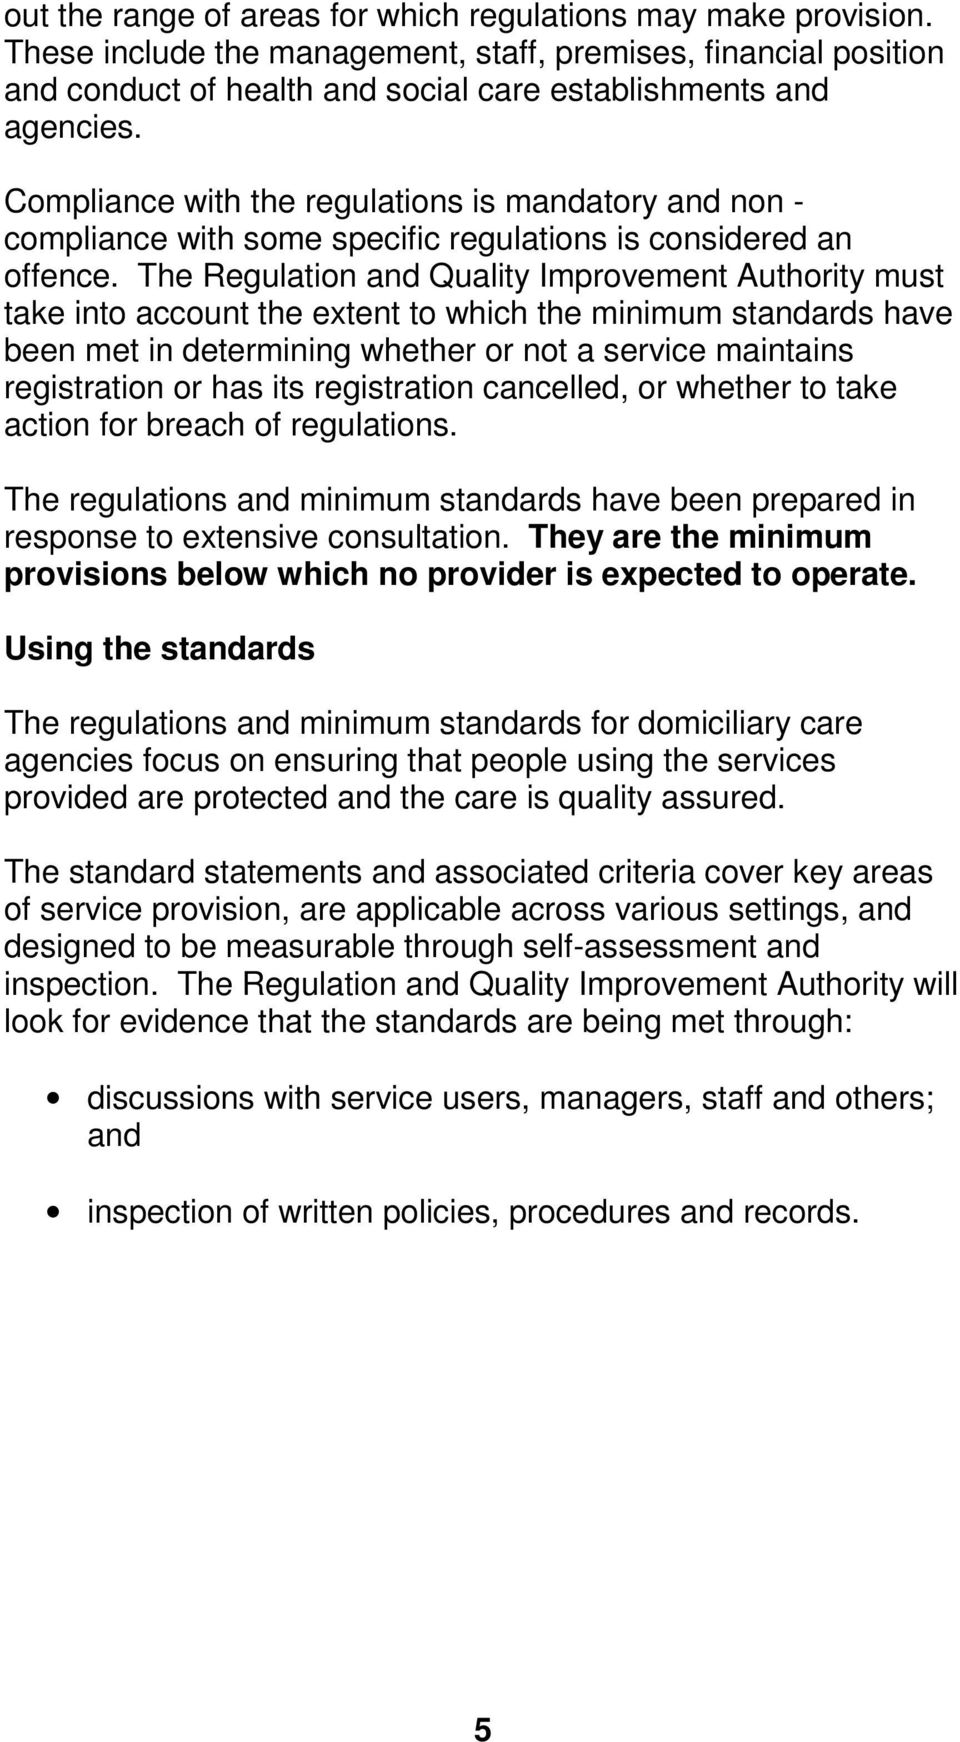 The Regulation and Quality Improvement Authority must take into account the extent to which the minimum standards have been met in determining whether or not a service maintains registration or has